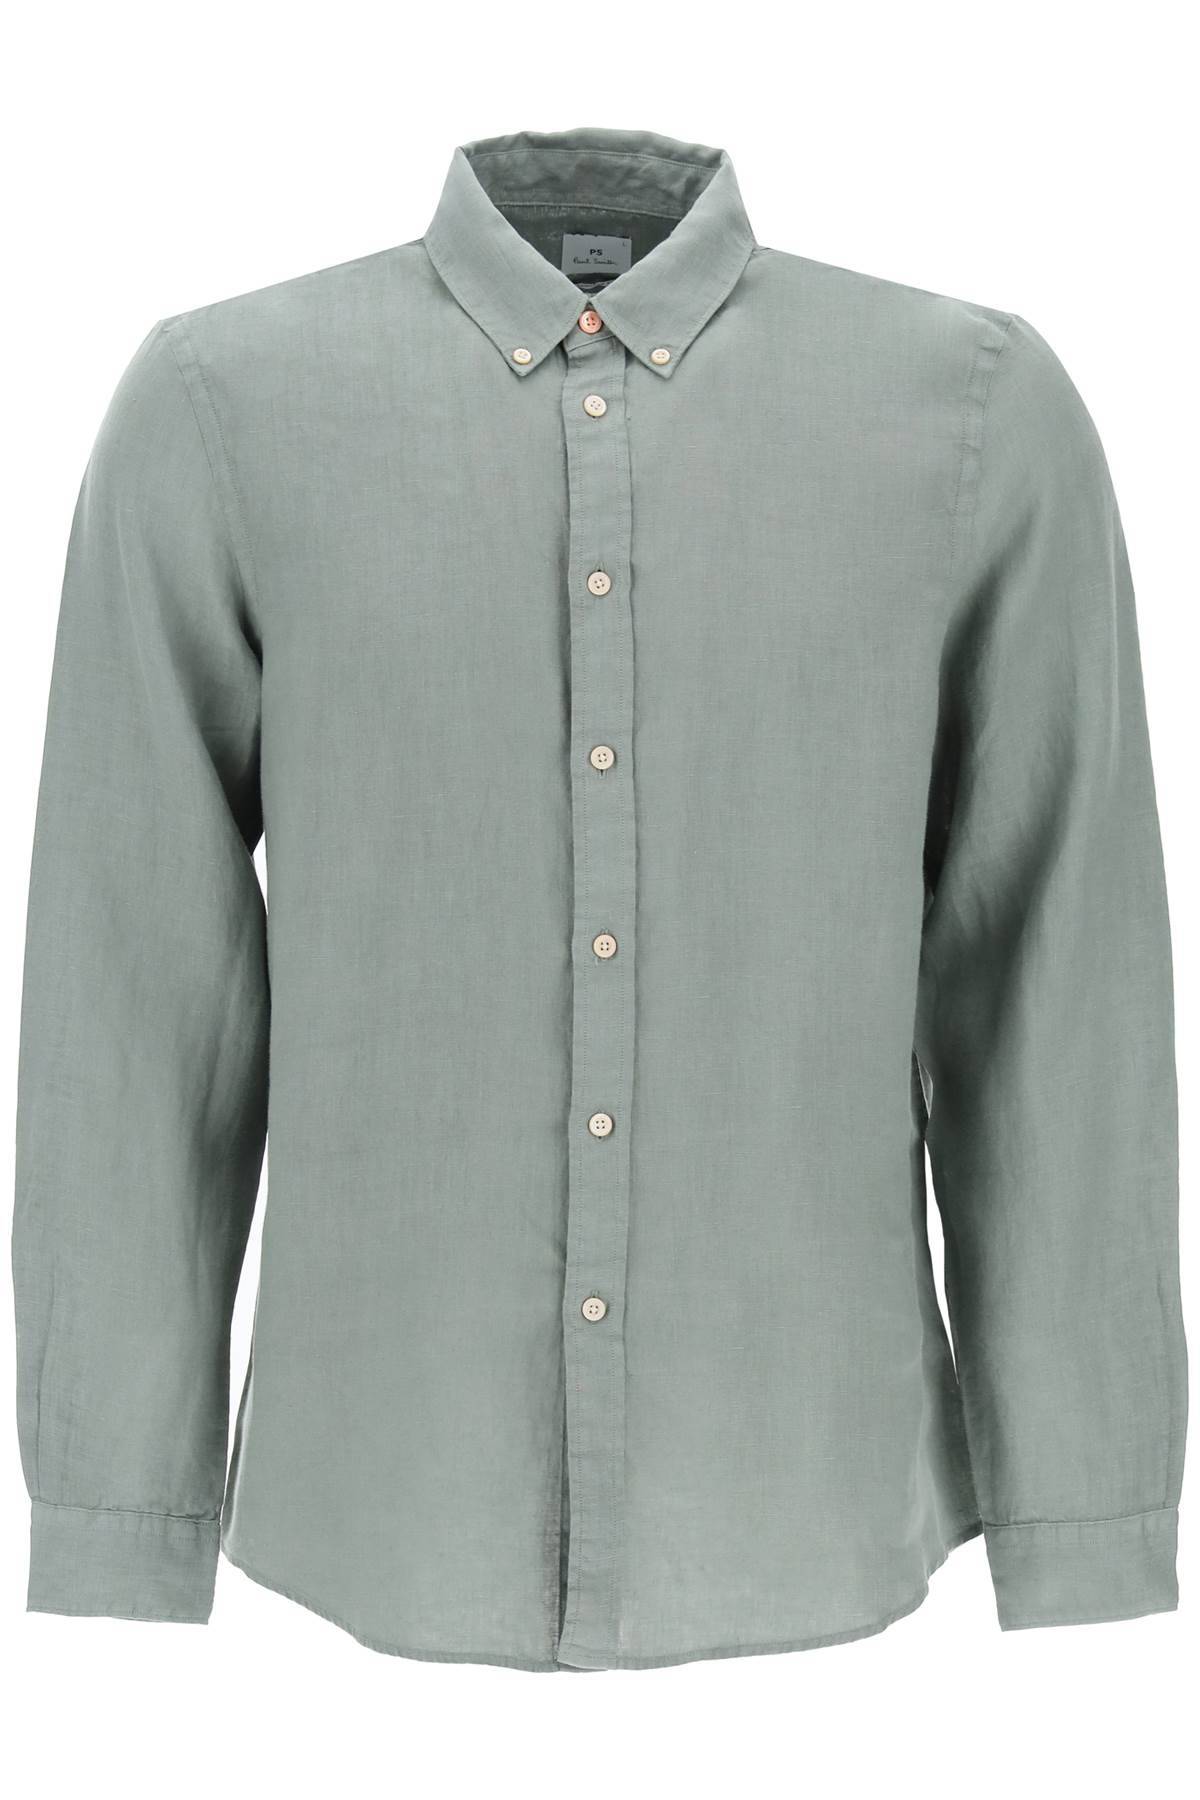 Ps Paul Smith PS PAUL SMITH linen button-down shirt for